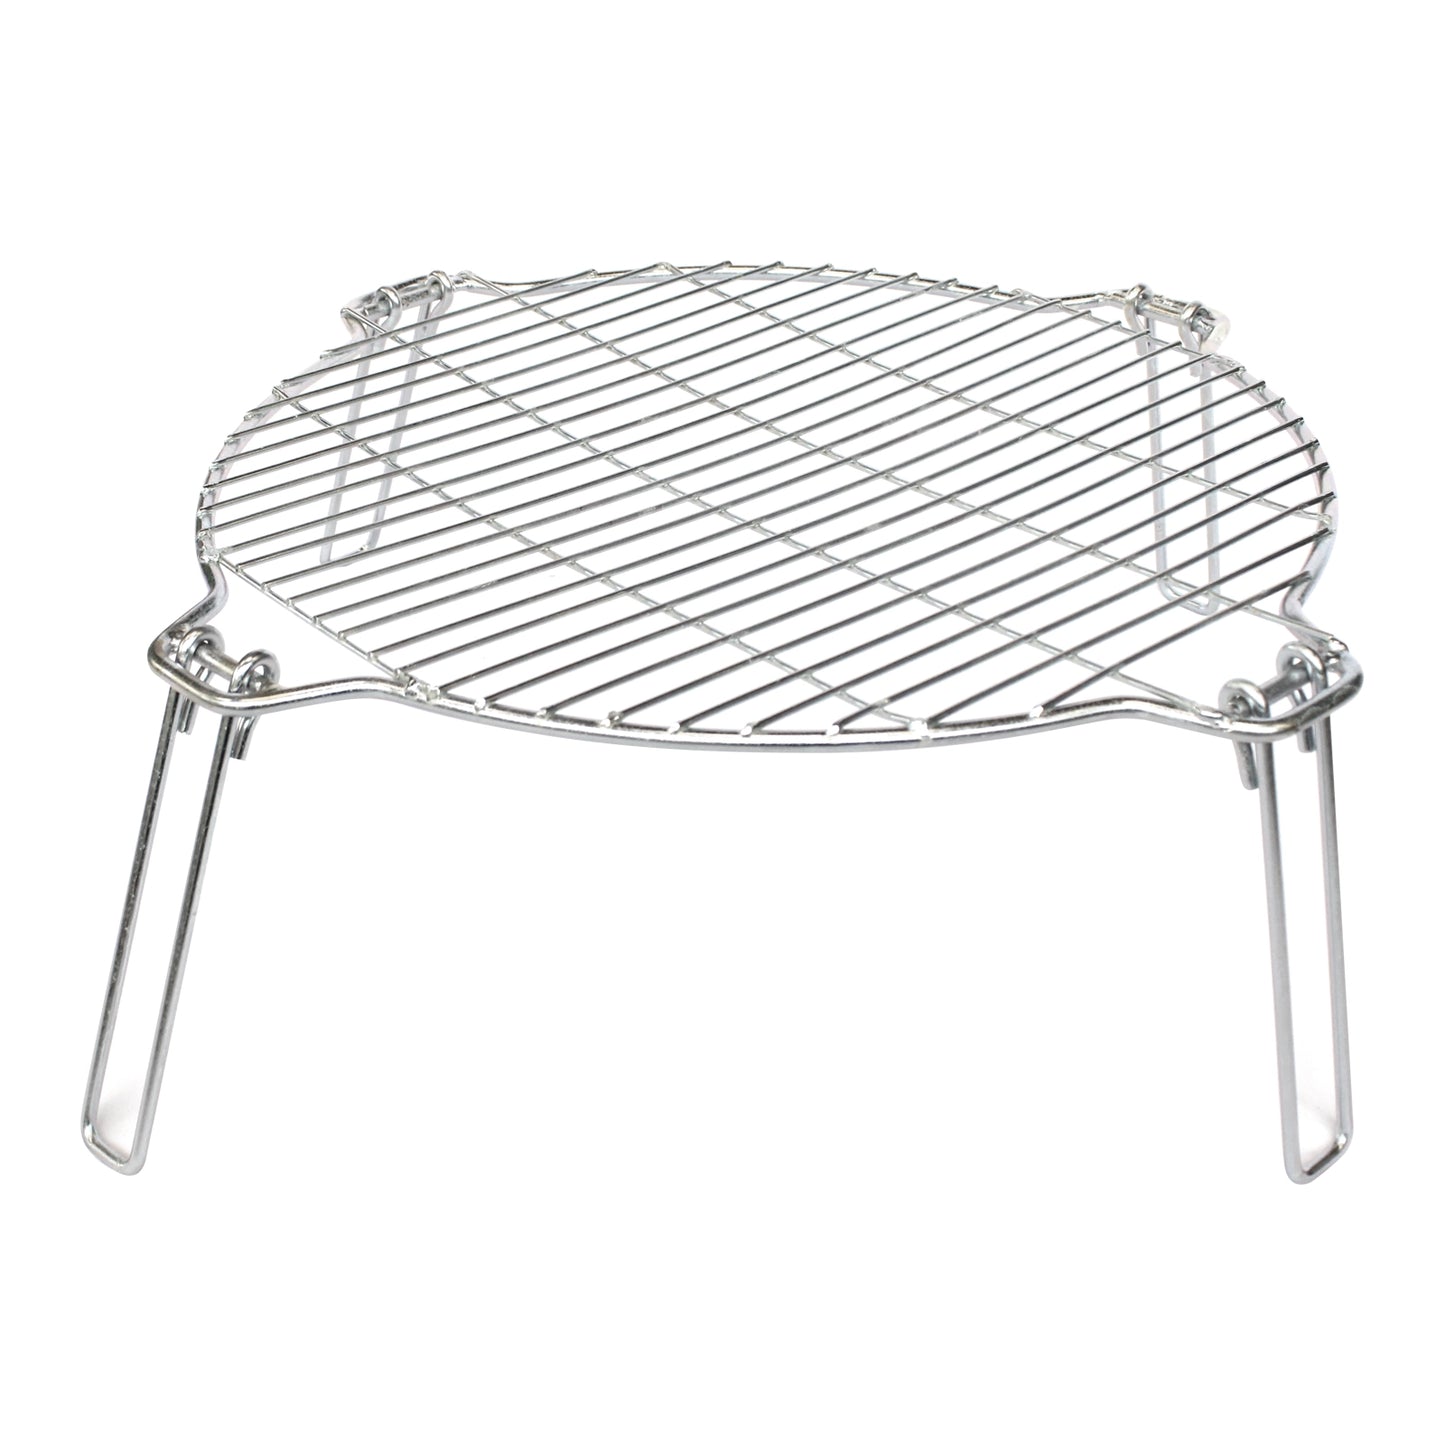 Steel Collapsible Braai Grid Portable Stand